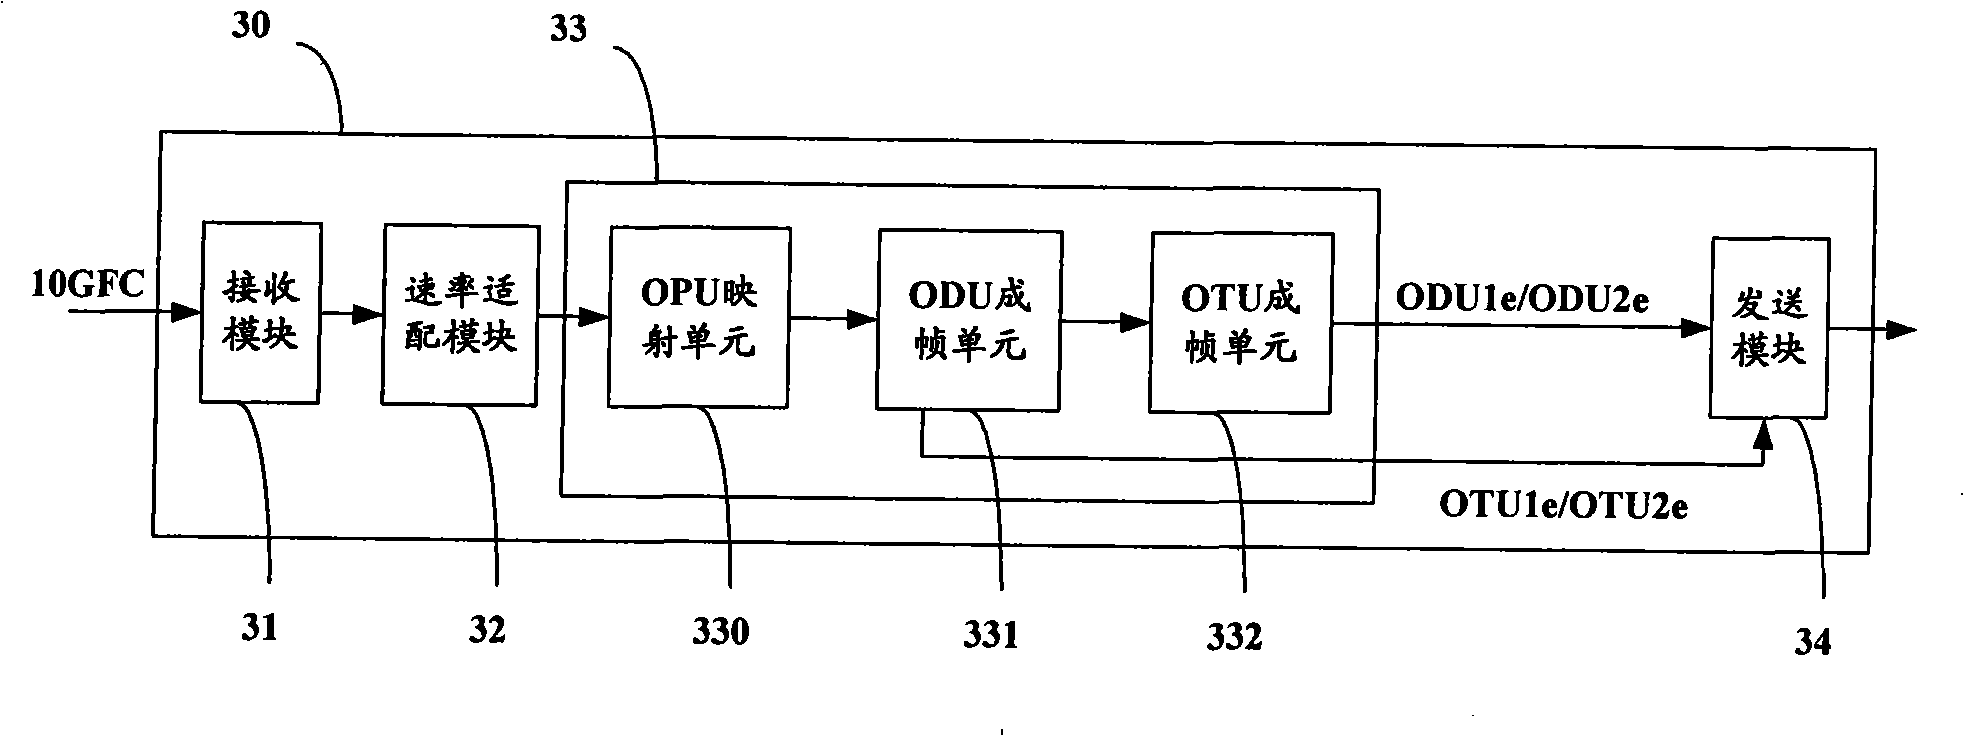 Method and apparatus for transmitting 10G bit optical fiber channel service in optical transmission network